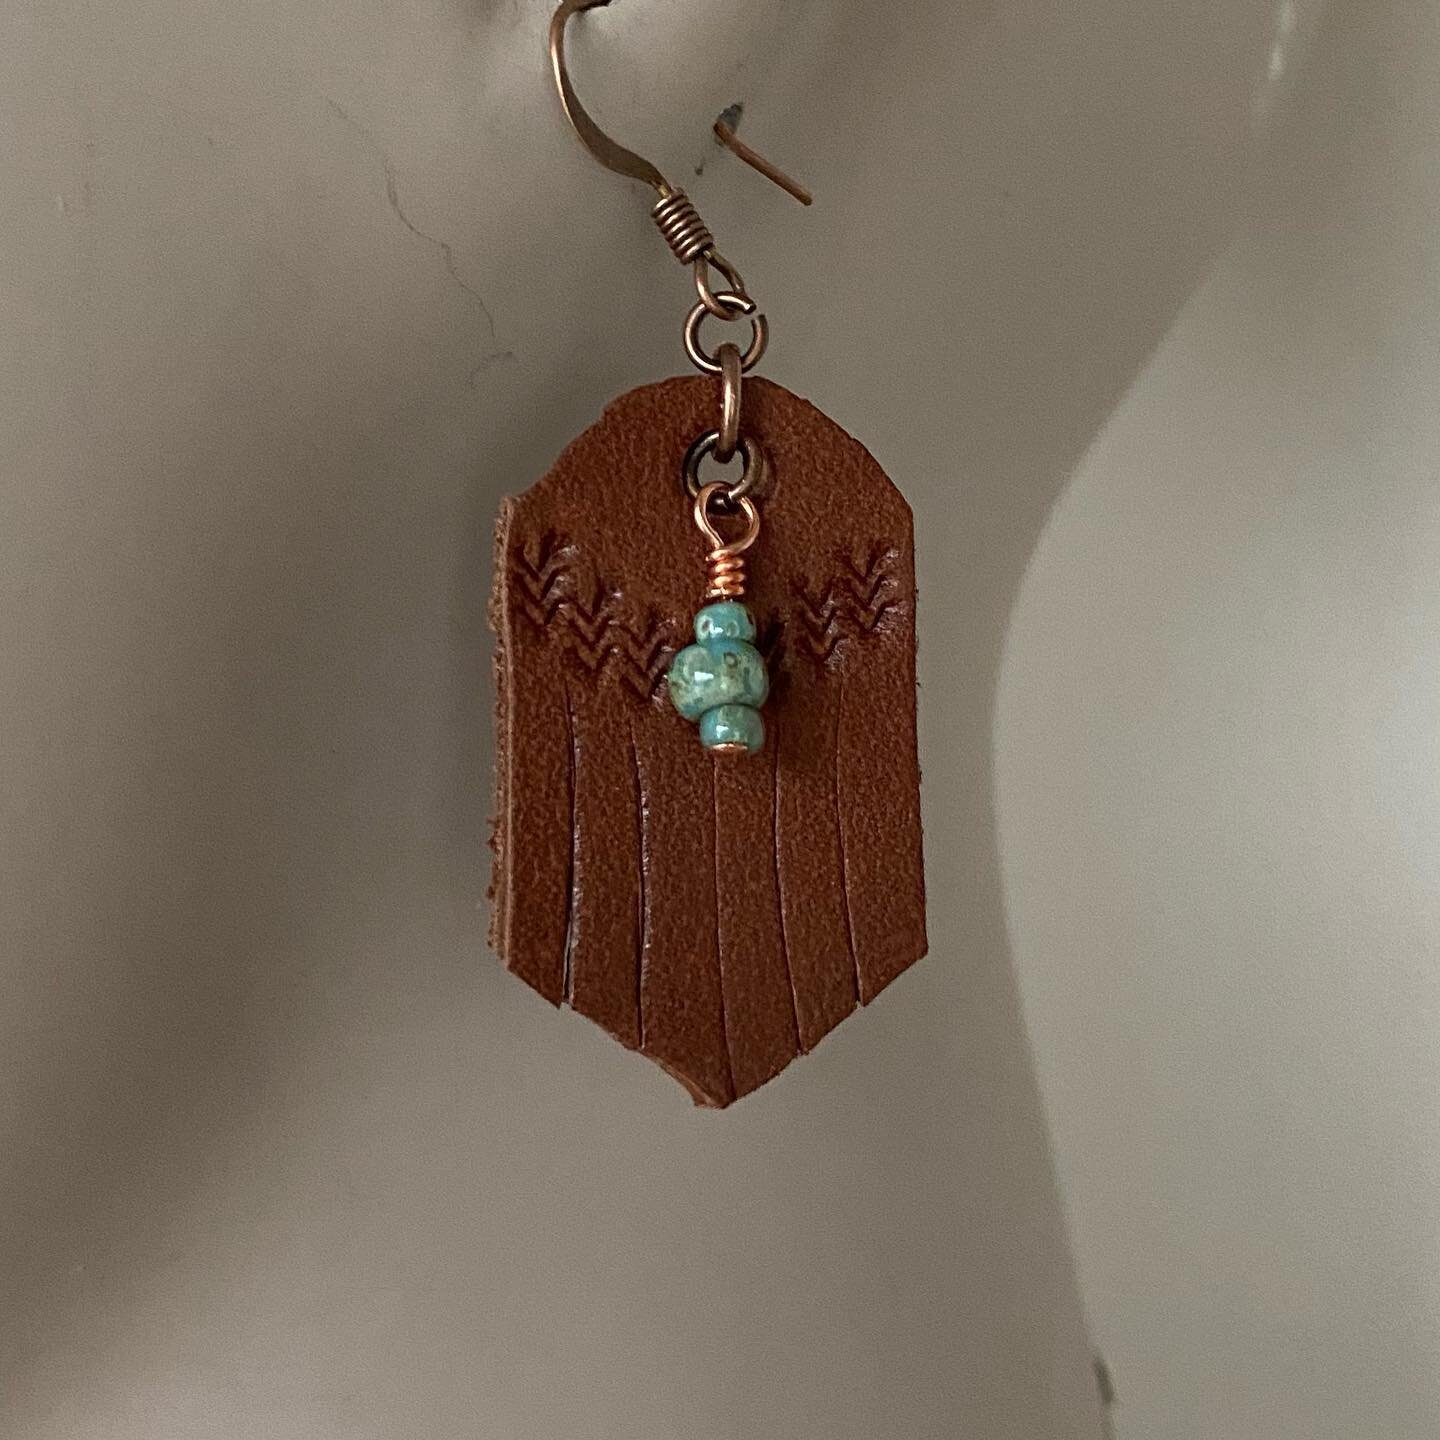 NEW! Leather and turquoise glass beads. Brown leather and copper or black leather and silver plate. #bethearrings $20.00

https://www.lmhjewelry.com/leather/lnnmj0uo44rf5wm3ik13ag1jrvjeby